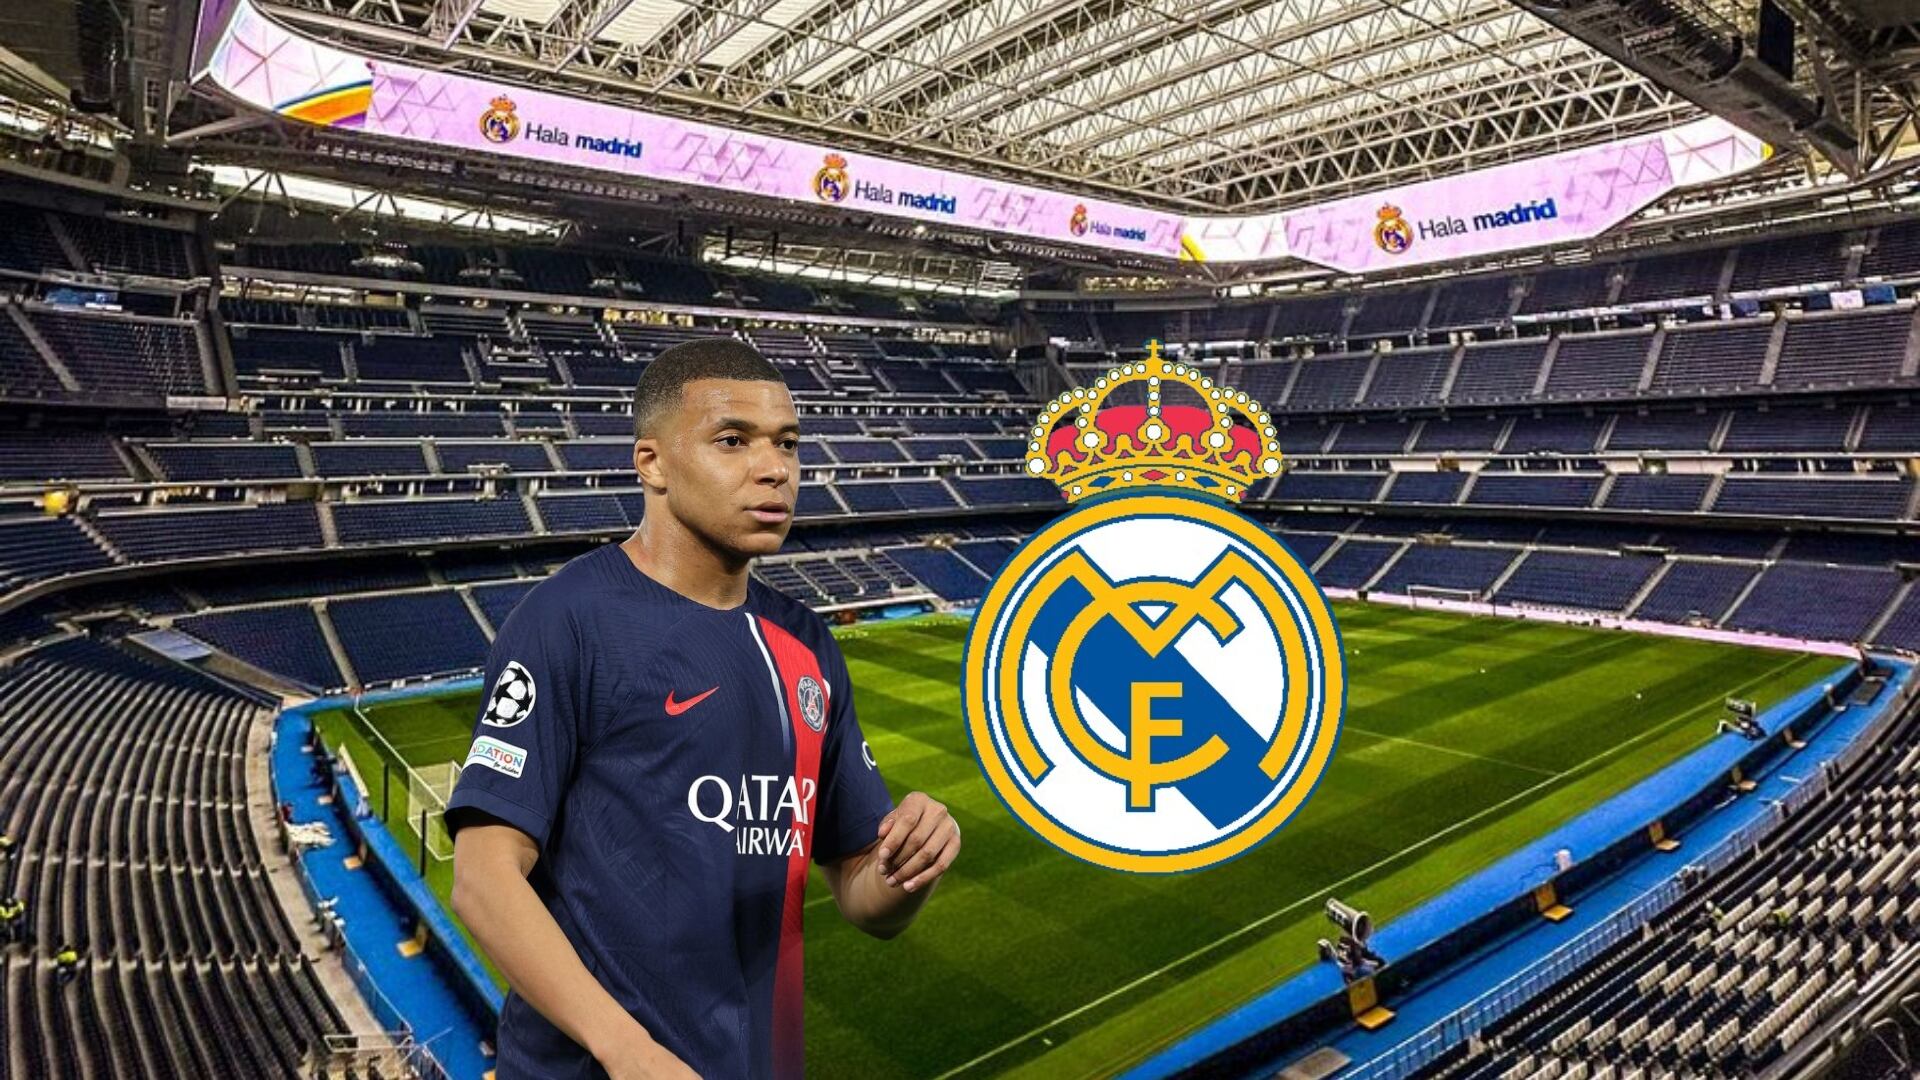 It won't be Mbappé's first time playing for Real Madrid, Kylian's curious fact ahead of his possible arrival to Madrid 